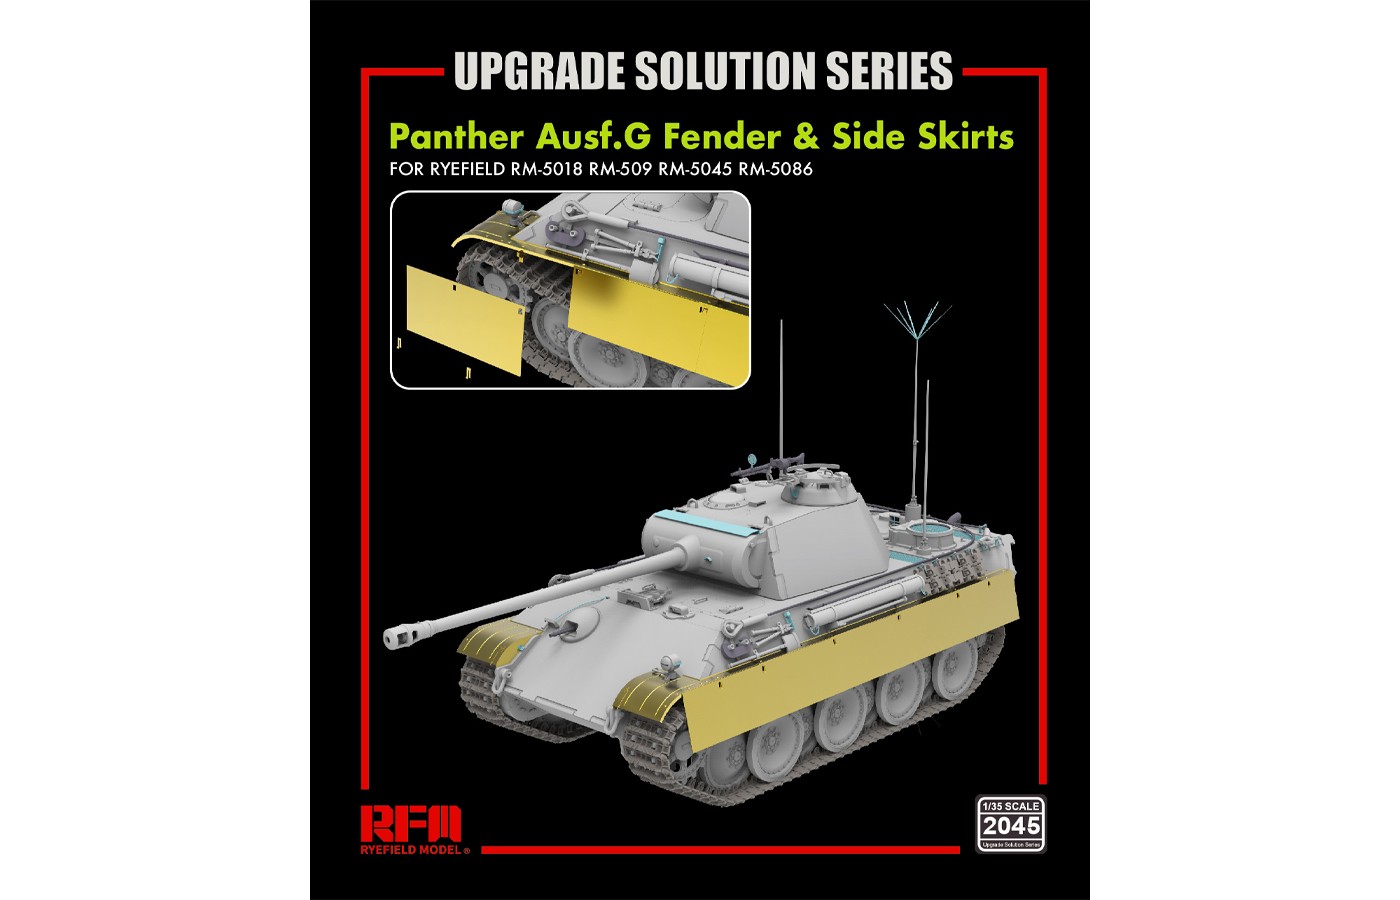 RM-2045 Panther Ausf.G Fender&Side Skirts